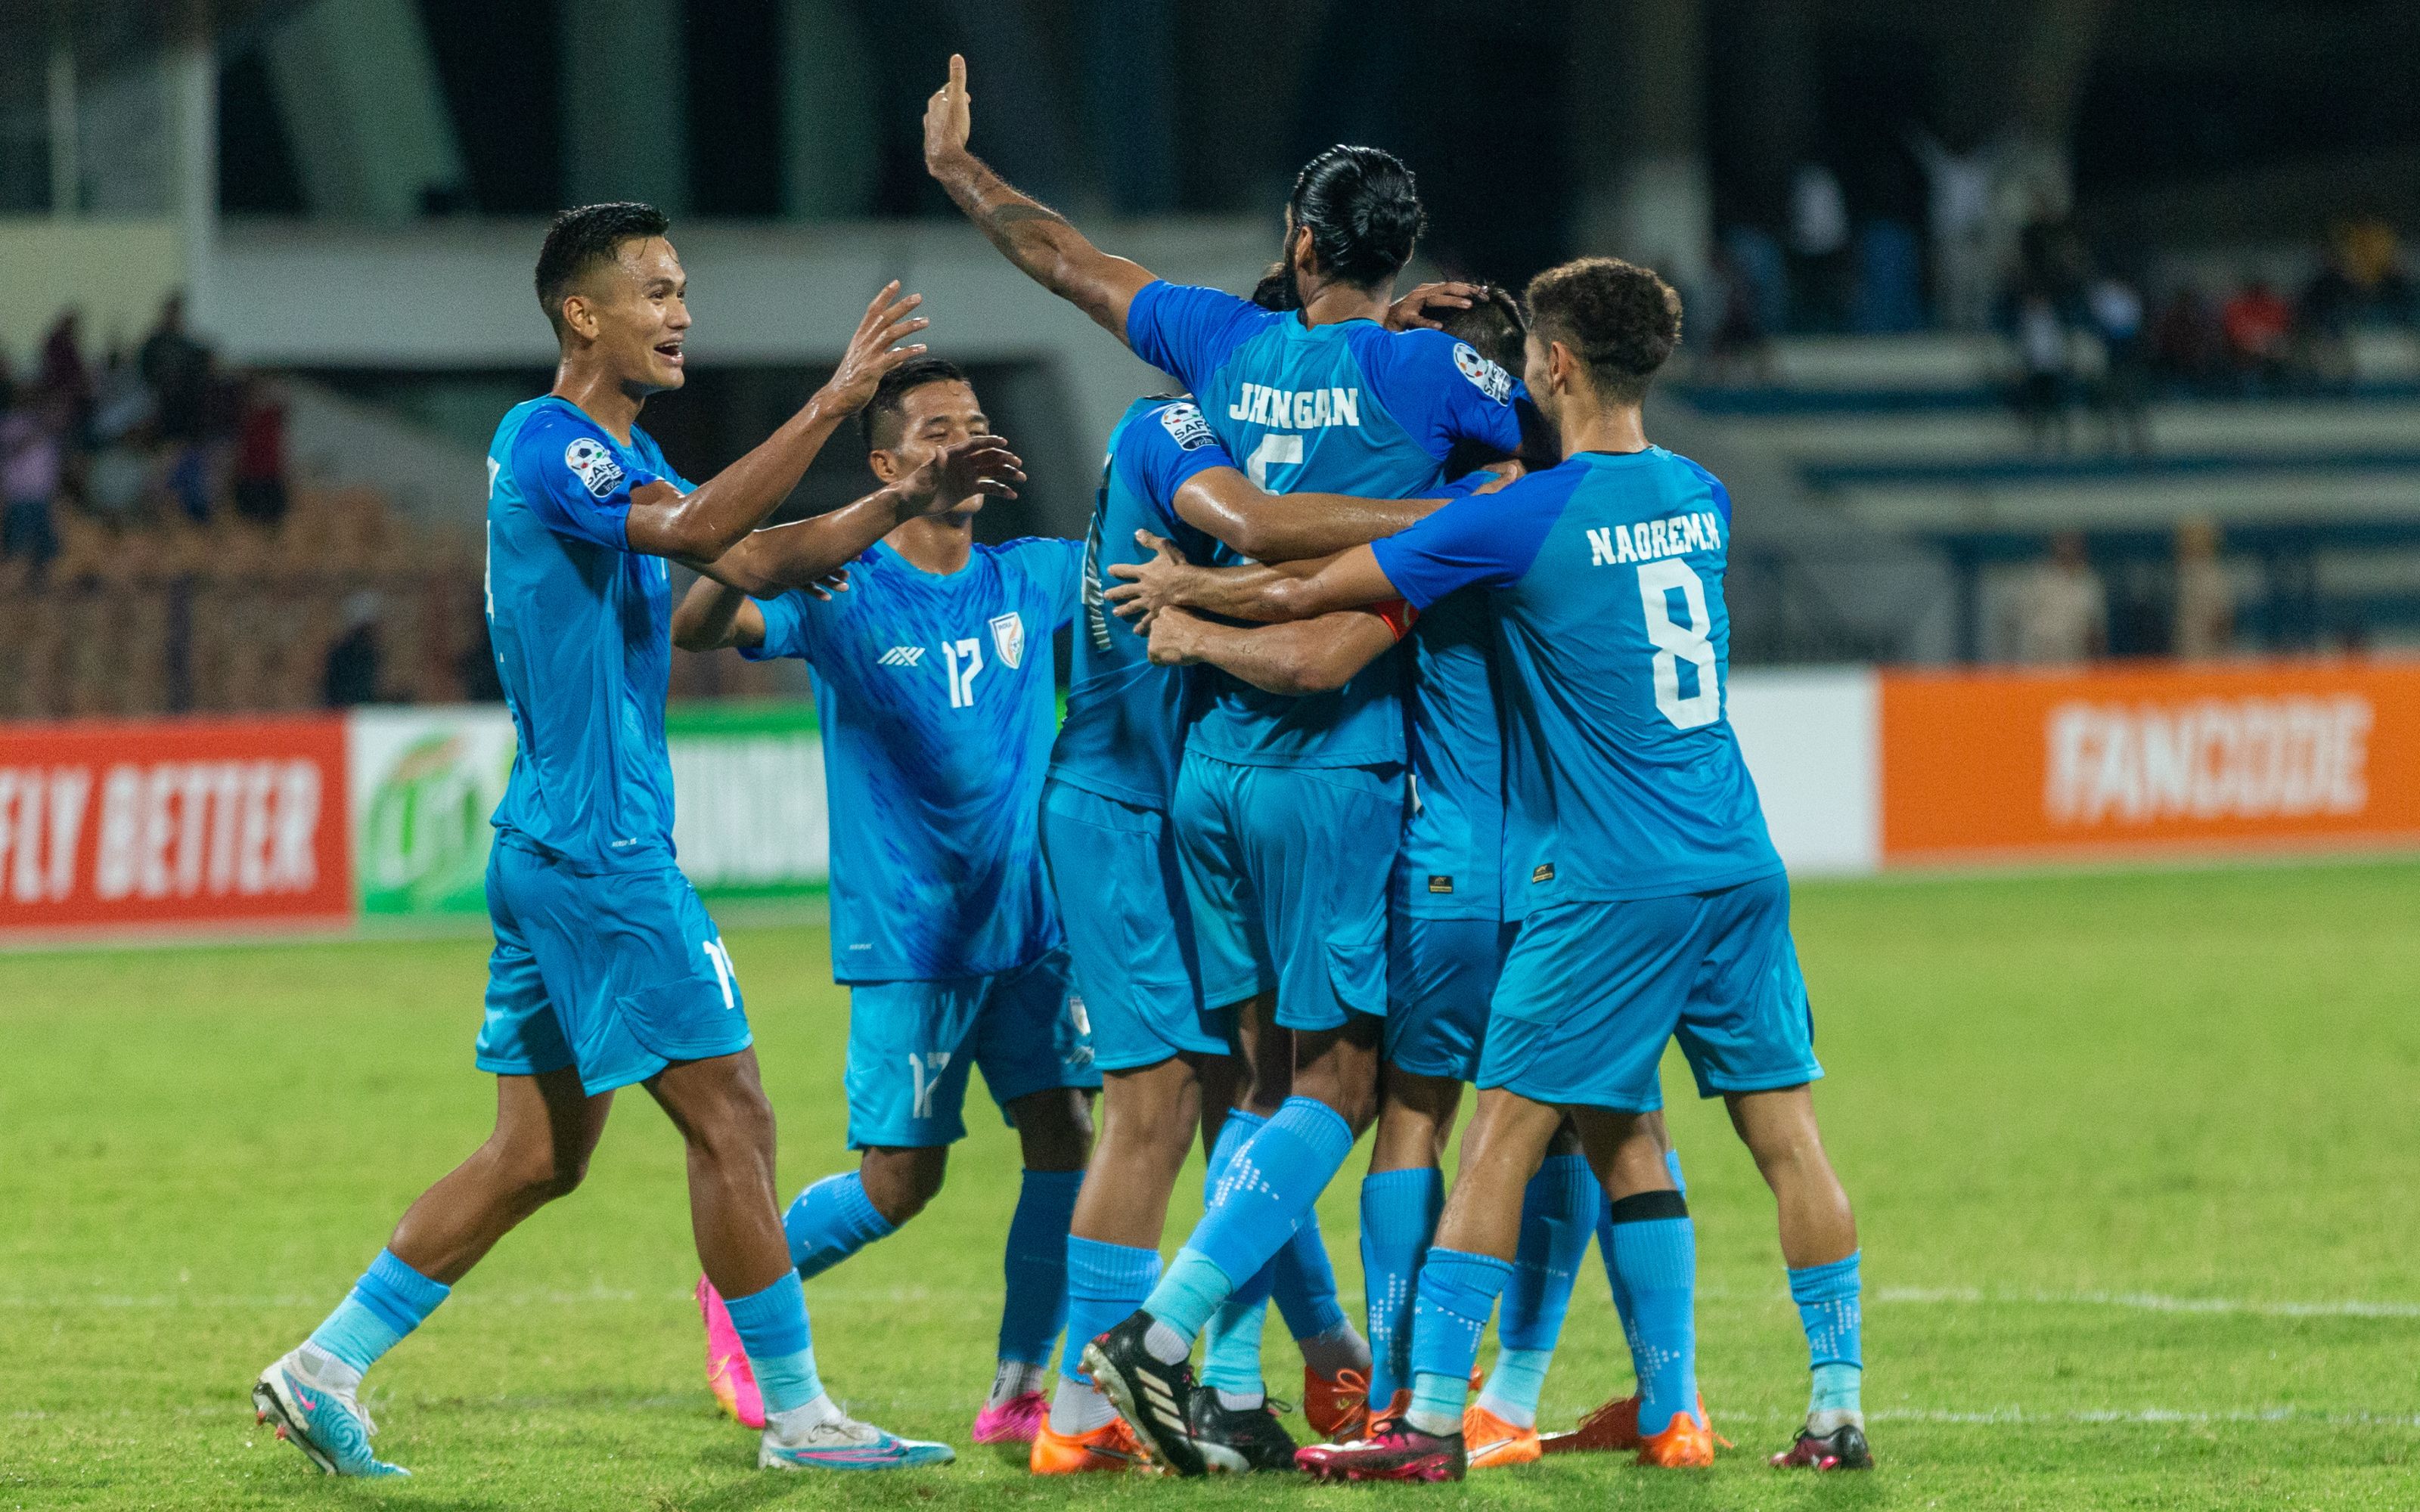 AIFF decide to postopone the national camp ahead of AFC U23 Qualifiers & Asian Games 2023 after ISL clubs refuse to let players